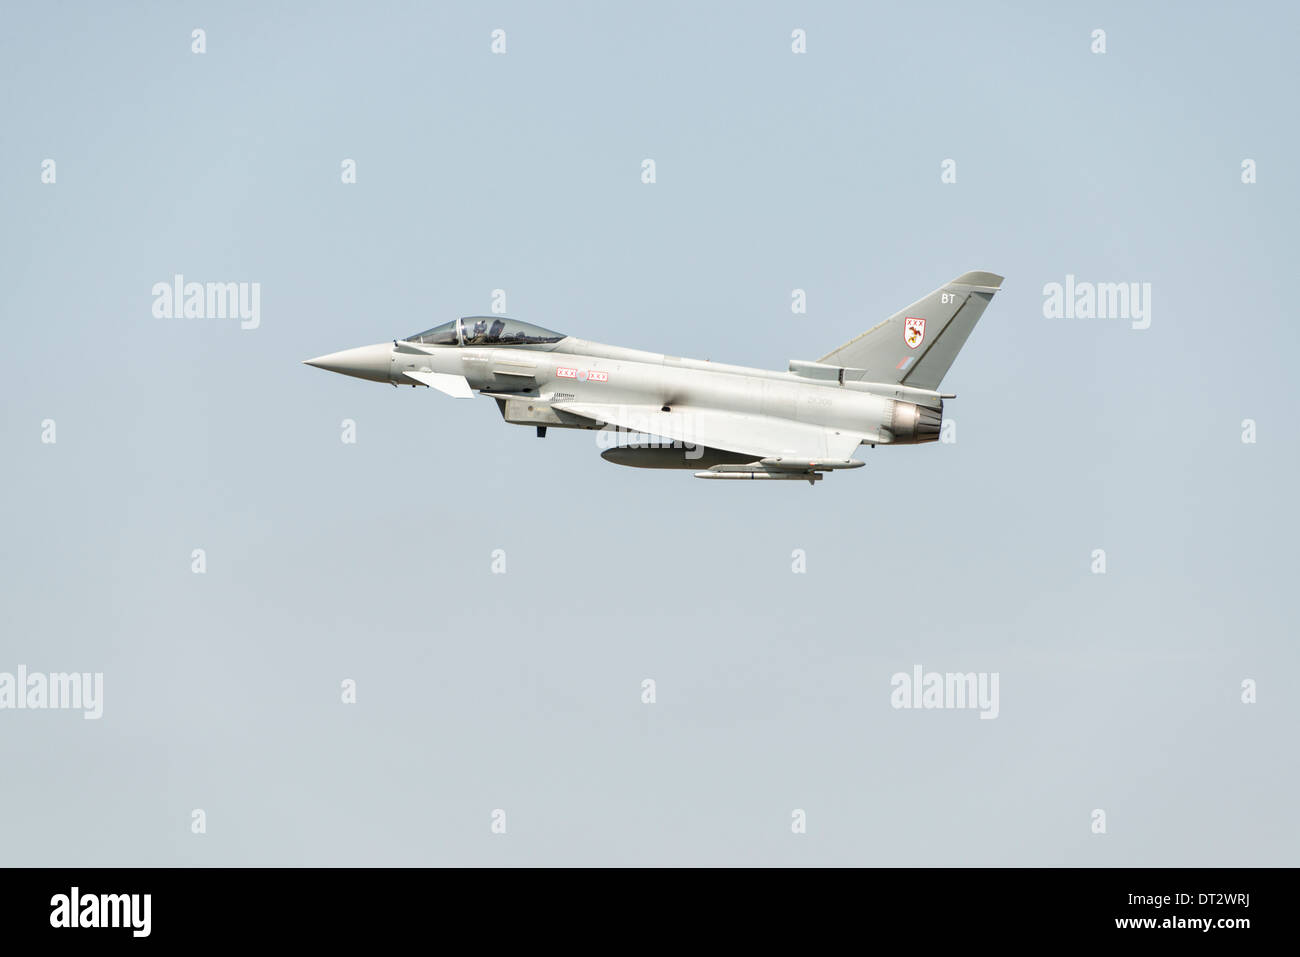 British Royal Air Force Eurofighter Typhoon RGF4 multi role fighter jet t'affiche en 2013 Royal International Air Tattoo. Banque D'Images